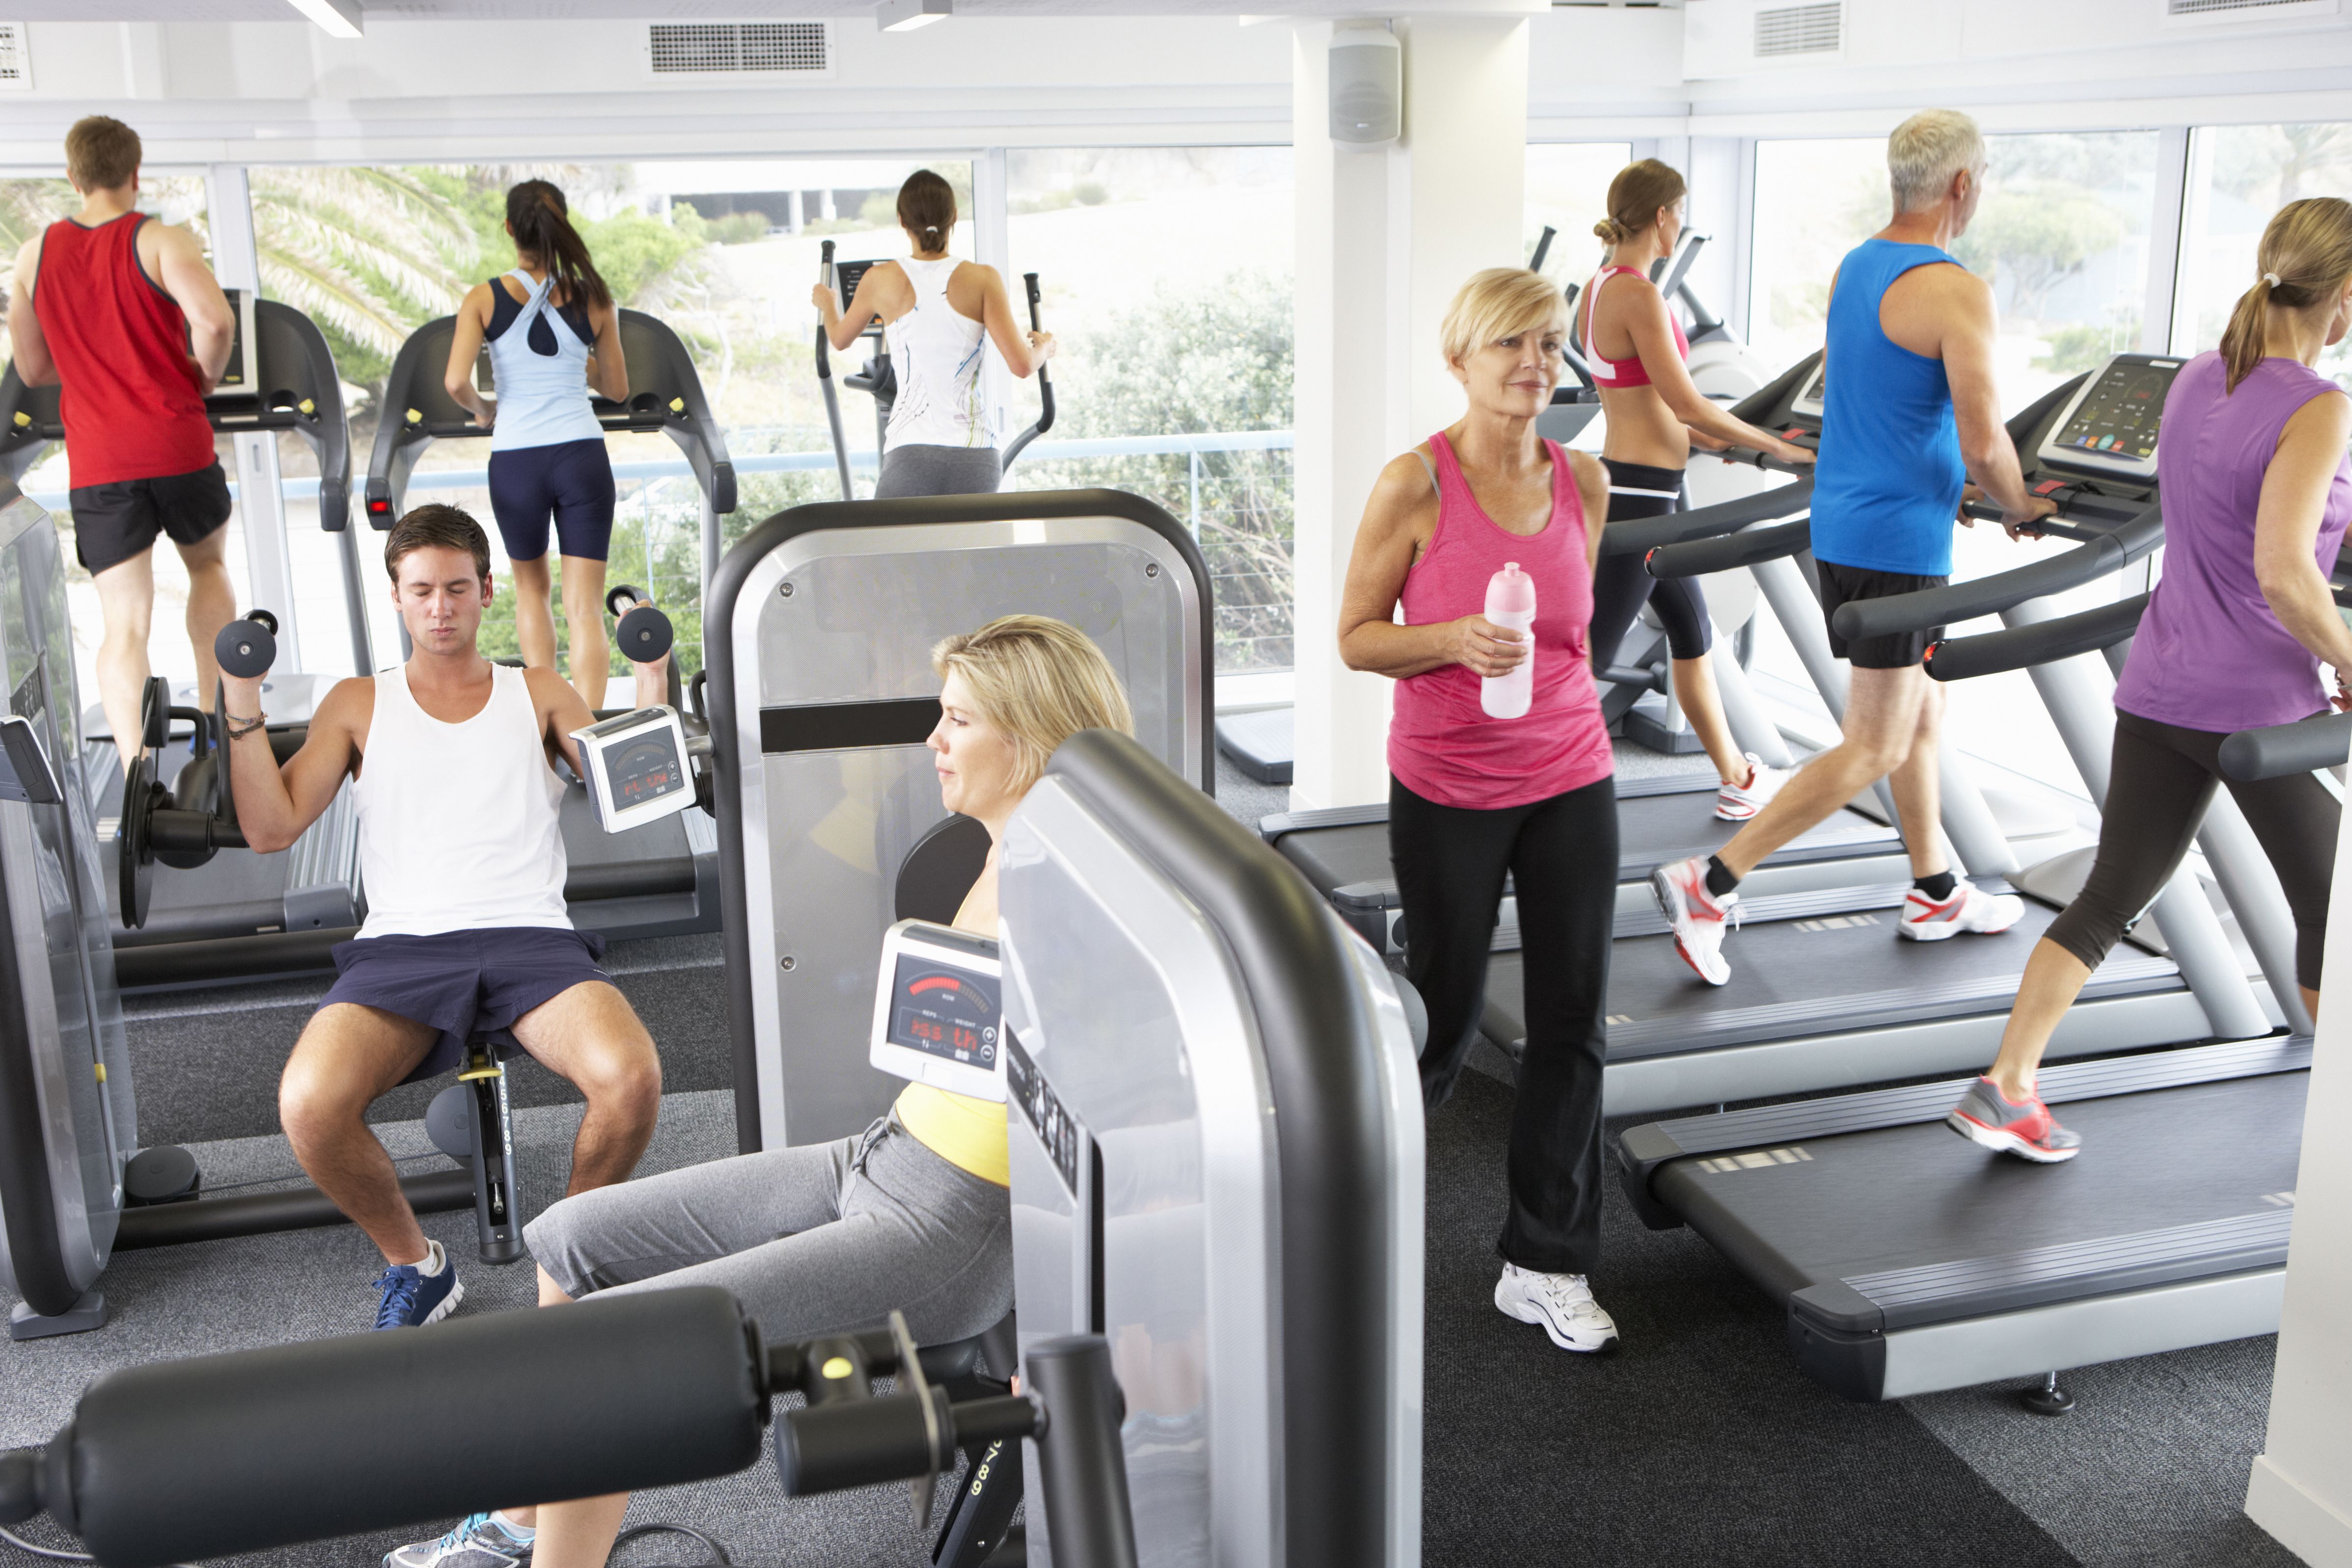 Gym motivation: Payments of a few cents can encourage you to workout